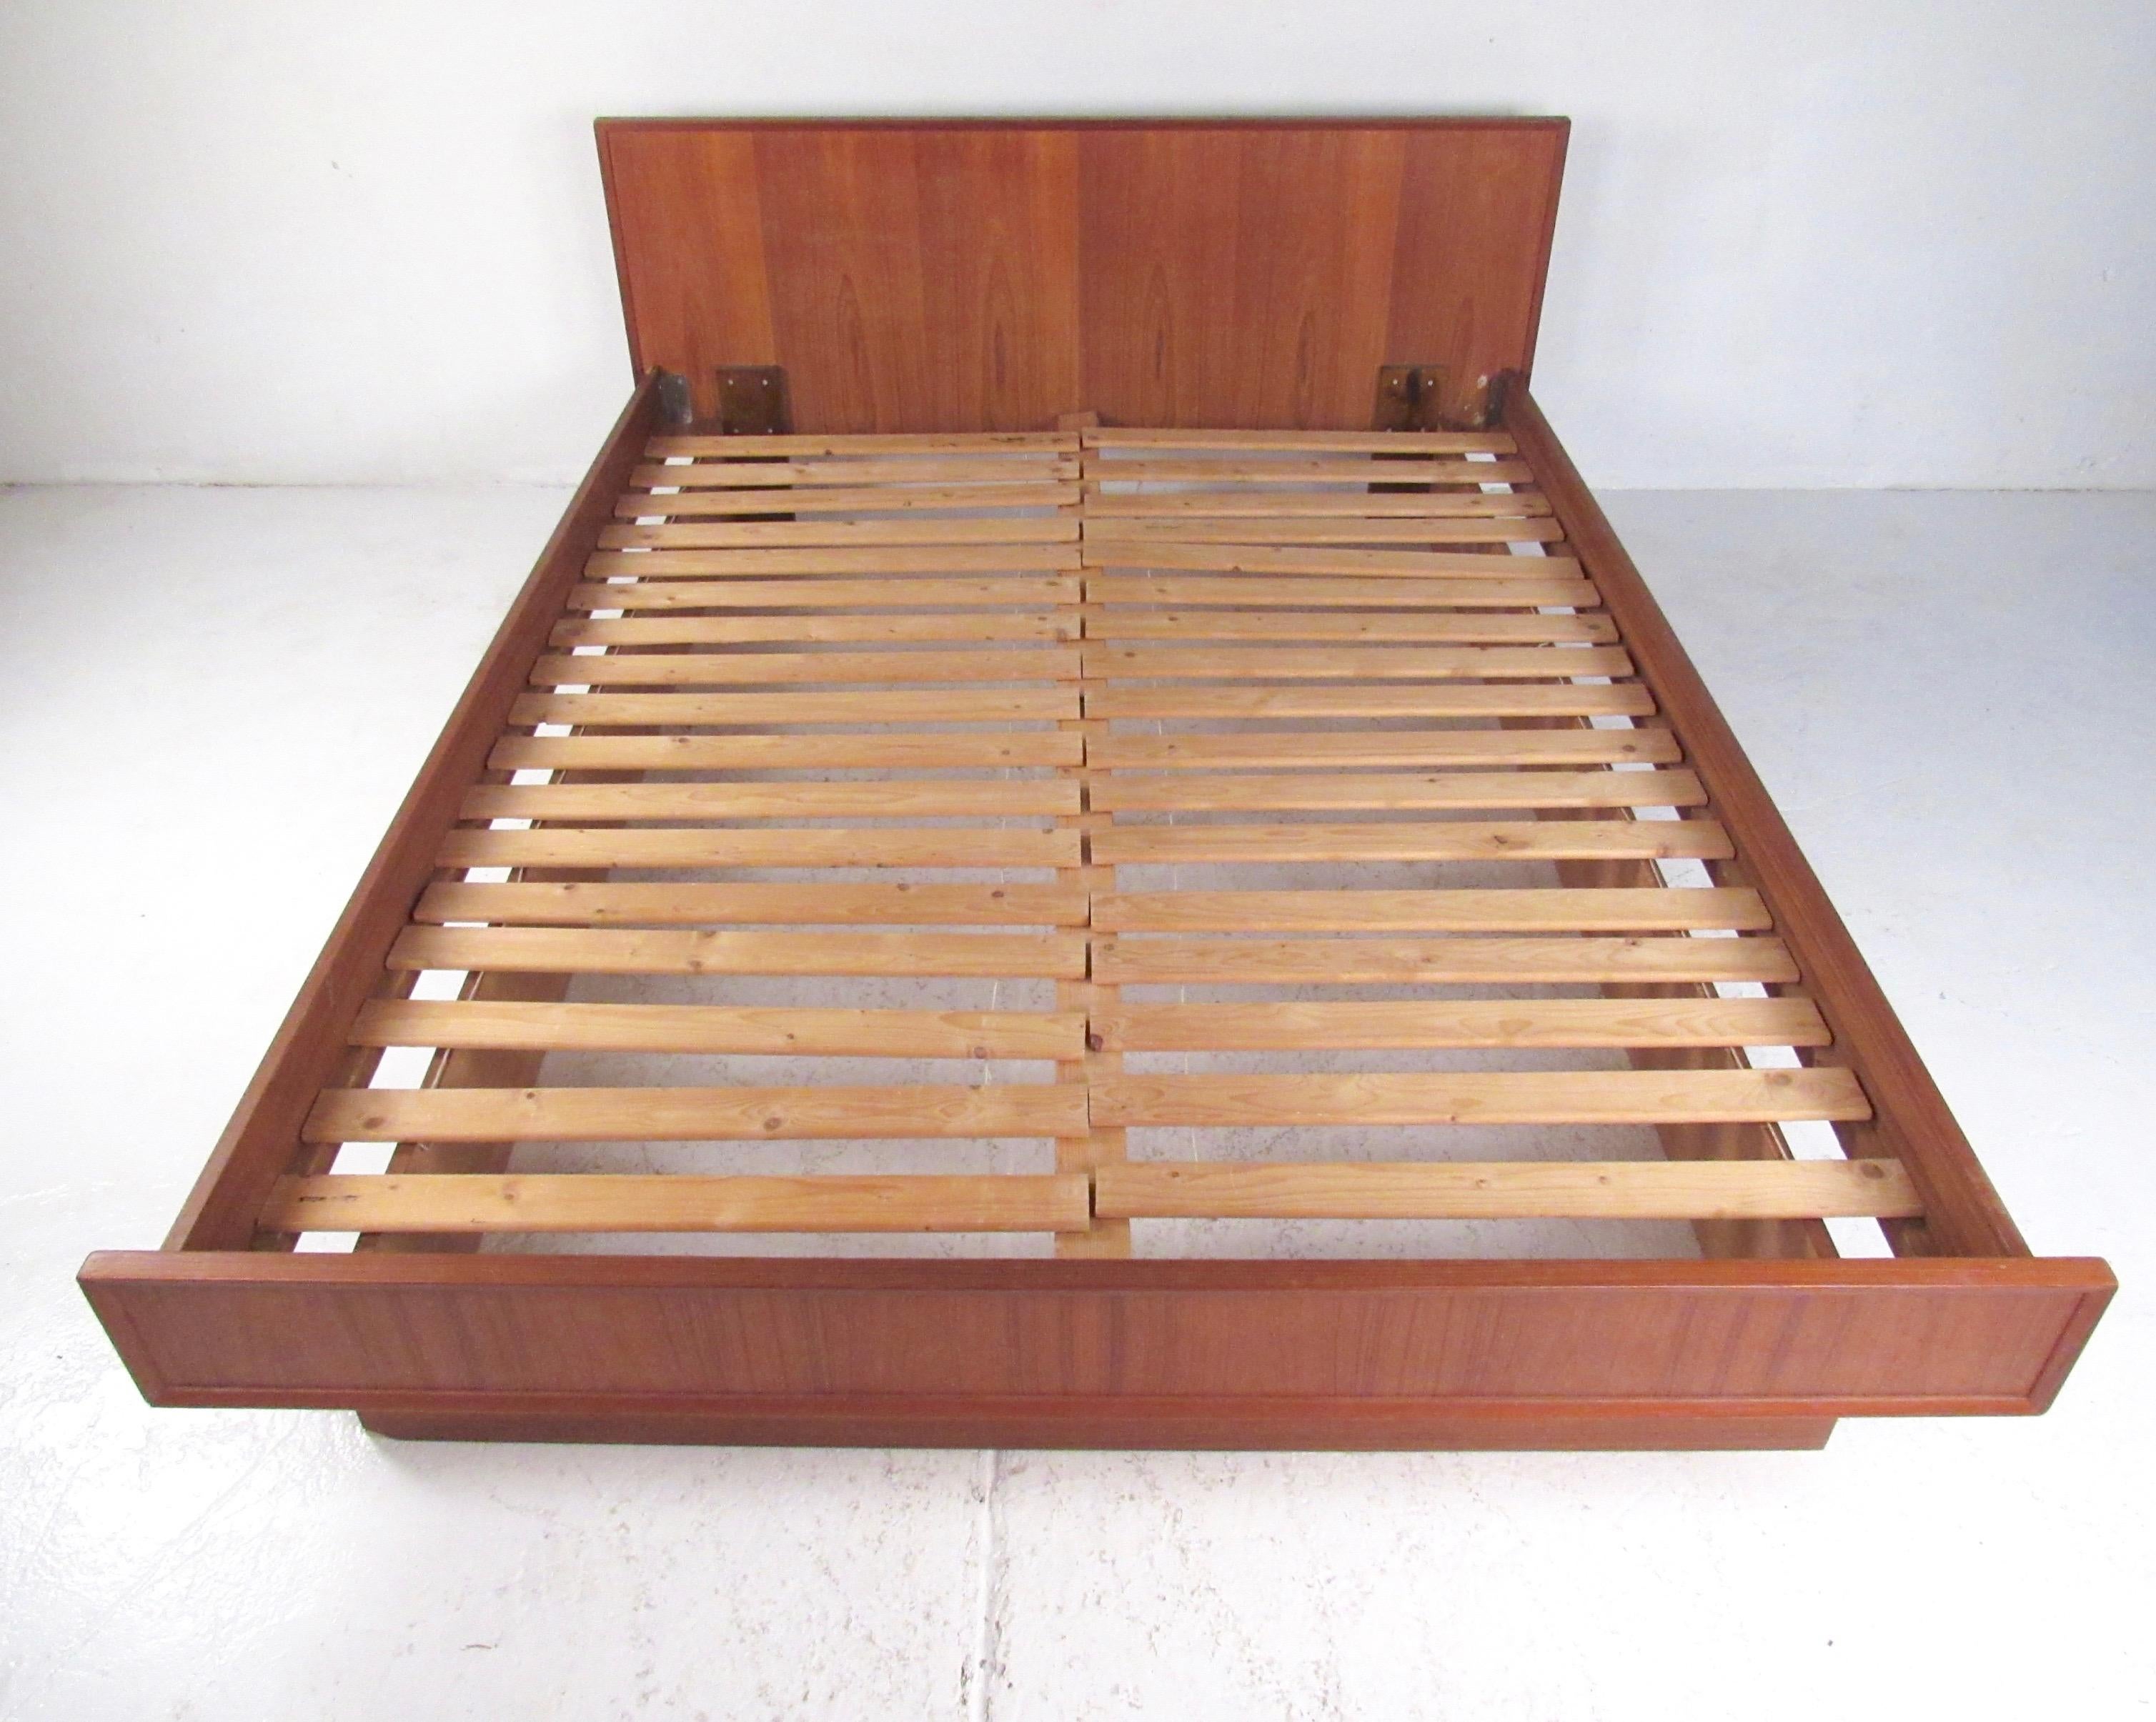 This striking Mid-Century Modern teak headboard and bed frame makes a striking vintage modern addition to your bedroom setting. Perfect fit for a queen-size mattress, the natural tone of the teak adds Scandinavian Modern flair to any interior.